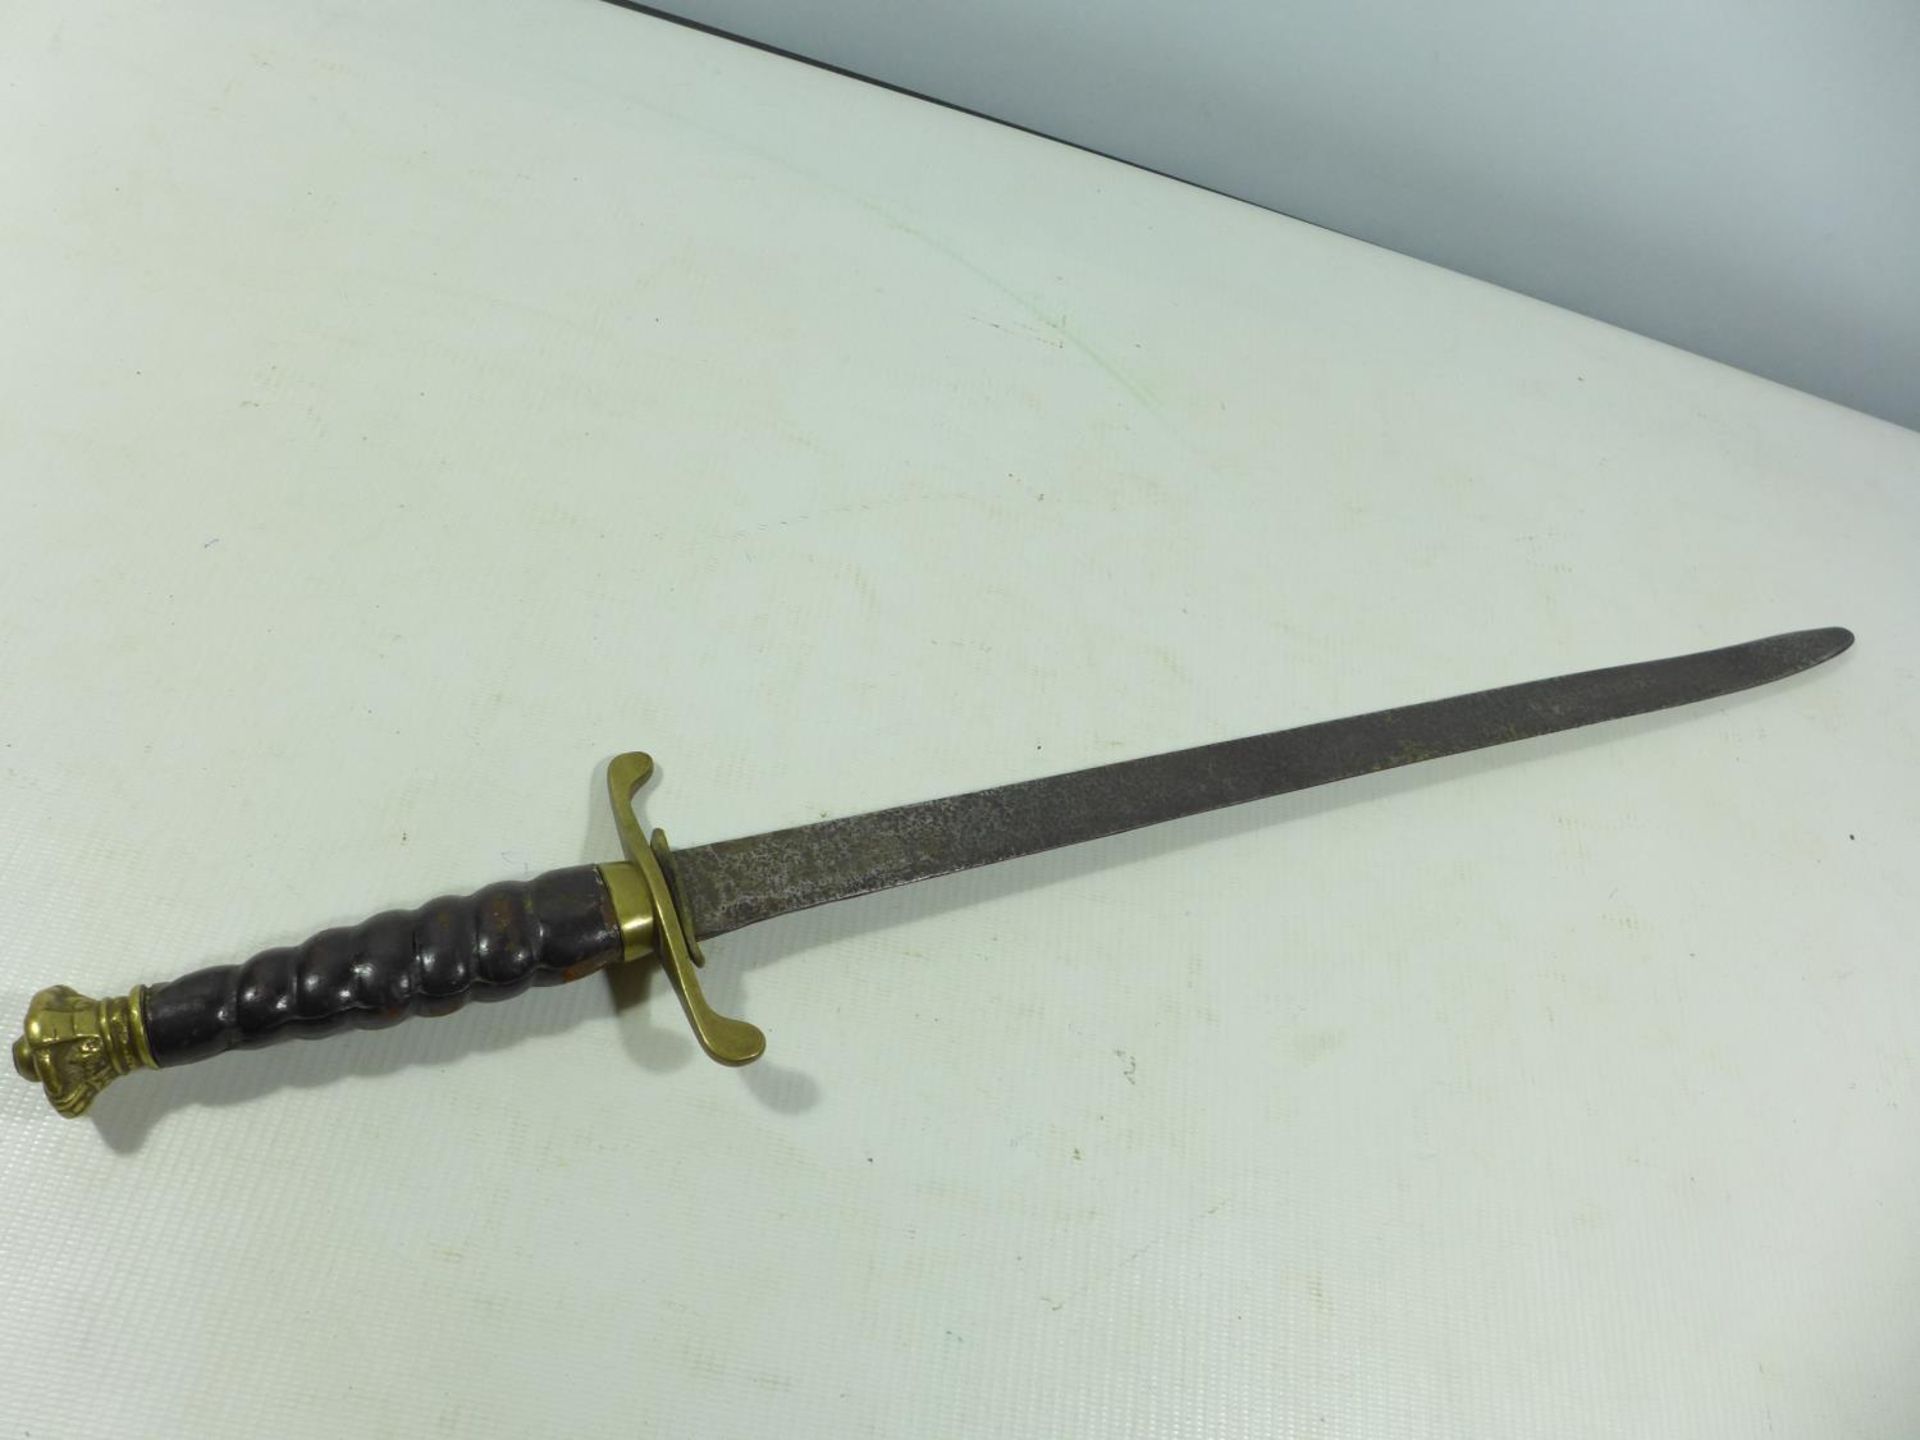 A 19TH CENTURY SHORT SWORD, 46CM BLADE, BRASS MOUNTS, LEATHER GRIP - Image 4 of 6